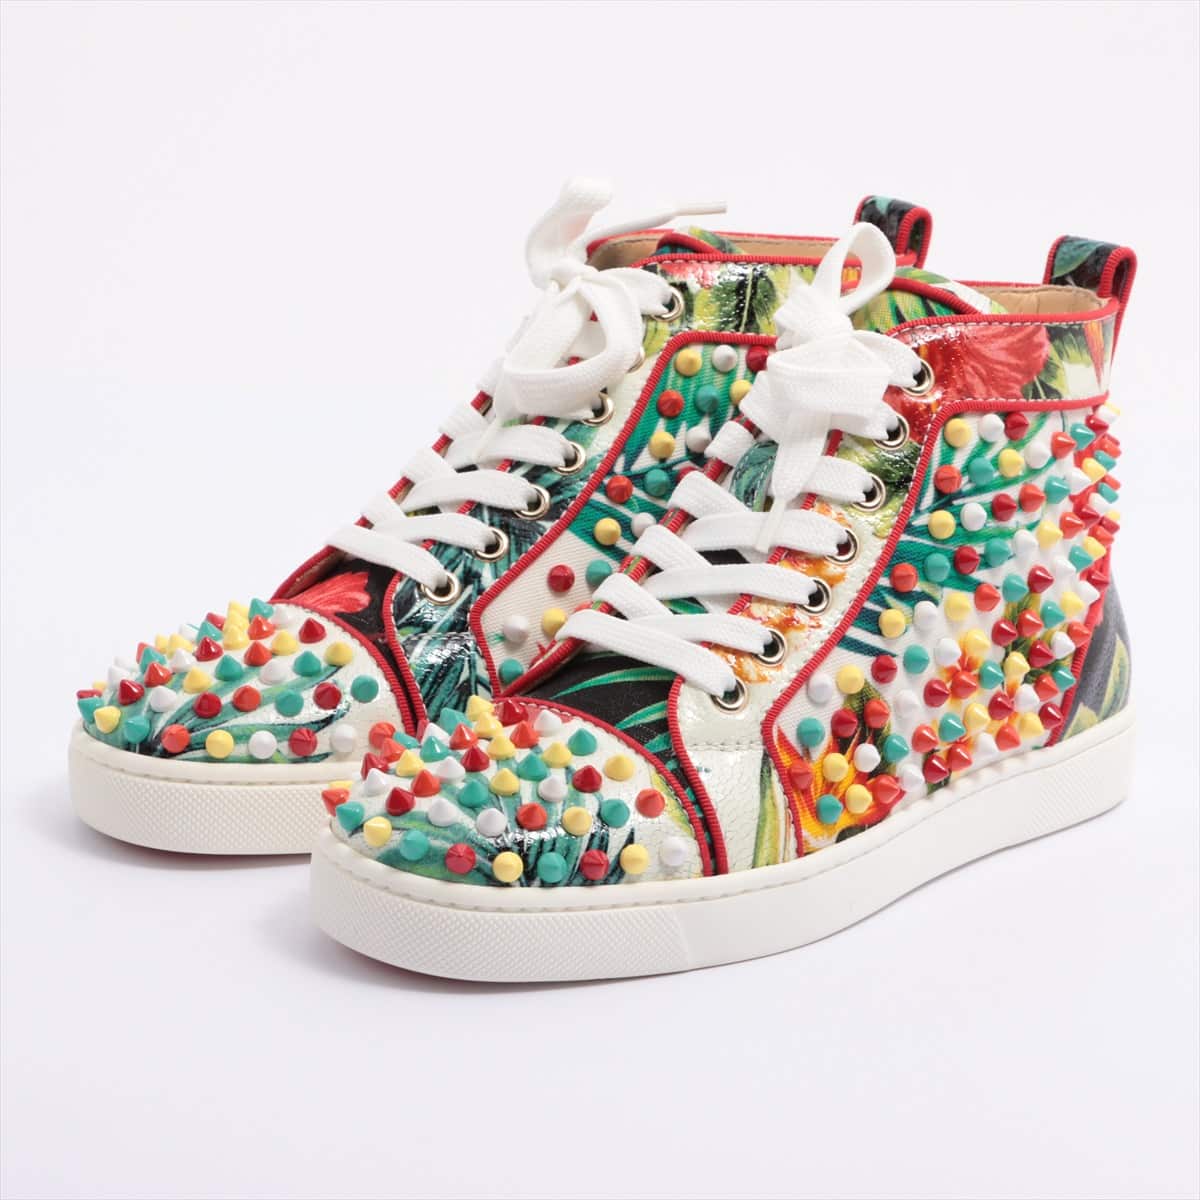 Christian Louboutin Lewis Spike Fabric Sneakers 35 Ladies' Multicolor LOUIS ORLATO Studs